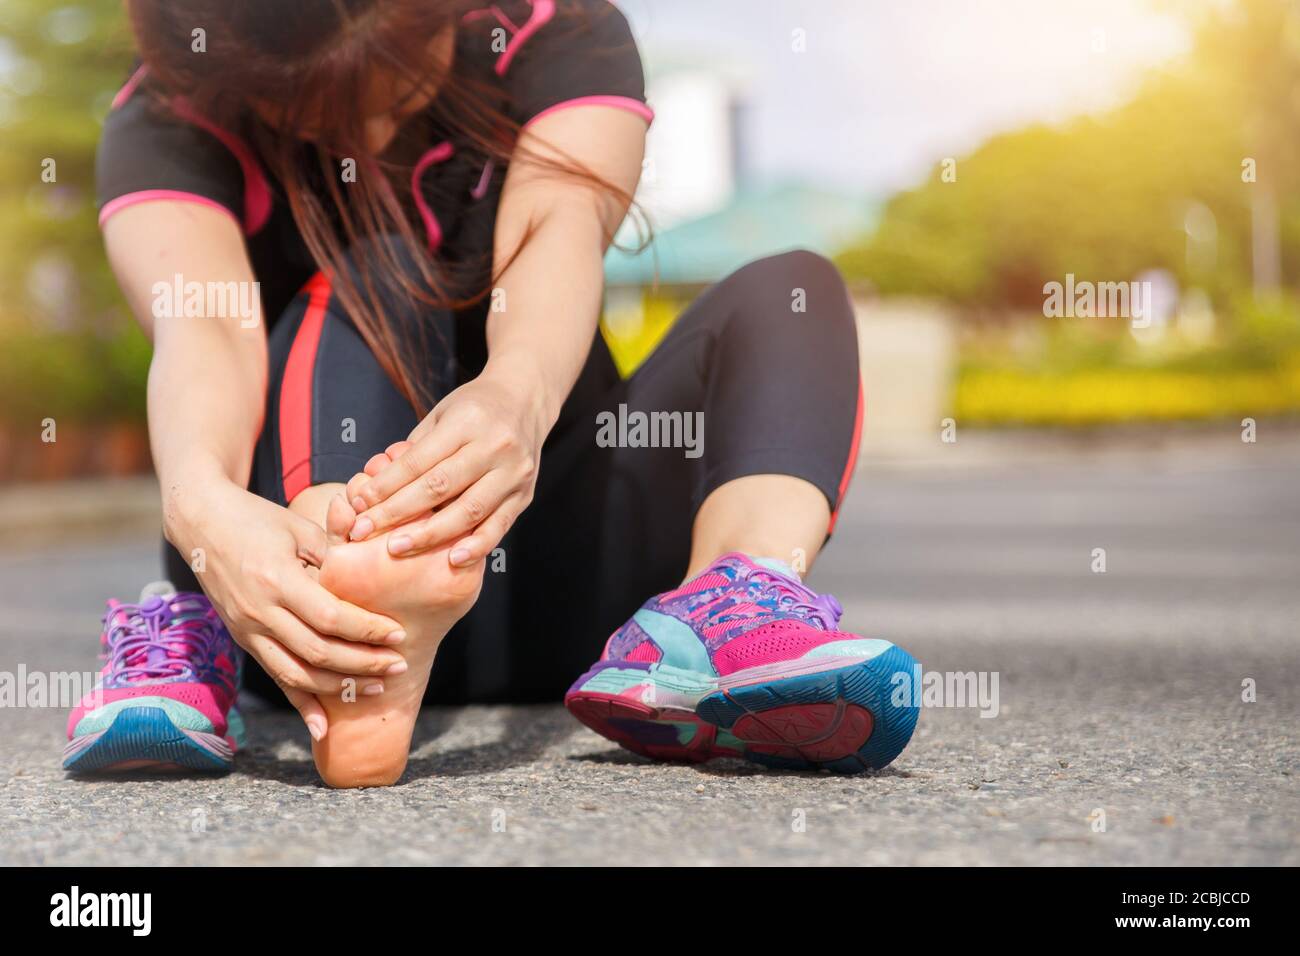 Female runner athlete foot injury and pain. Woman suffering from painful foot while running on the road. Stock Photo